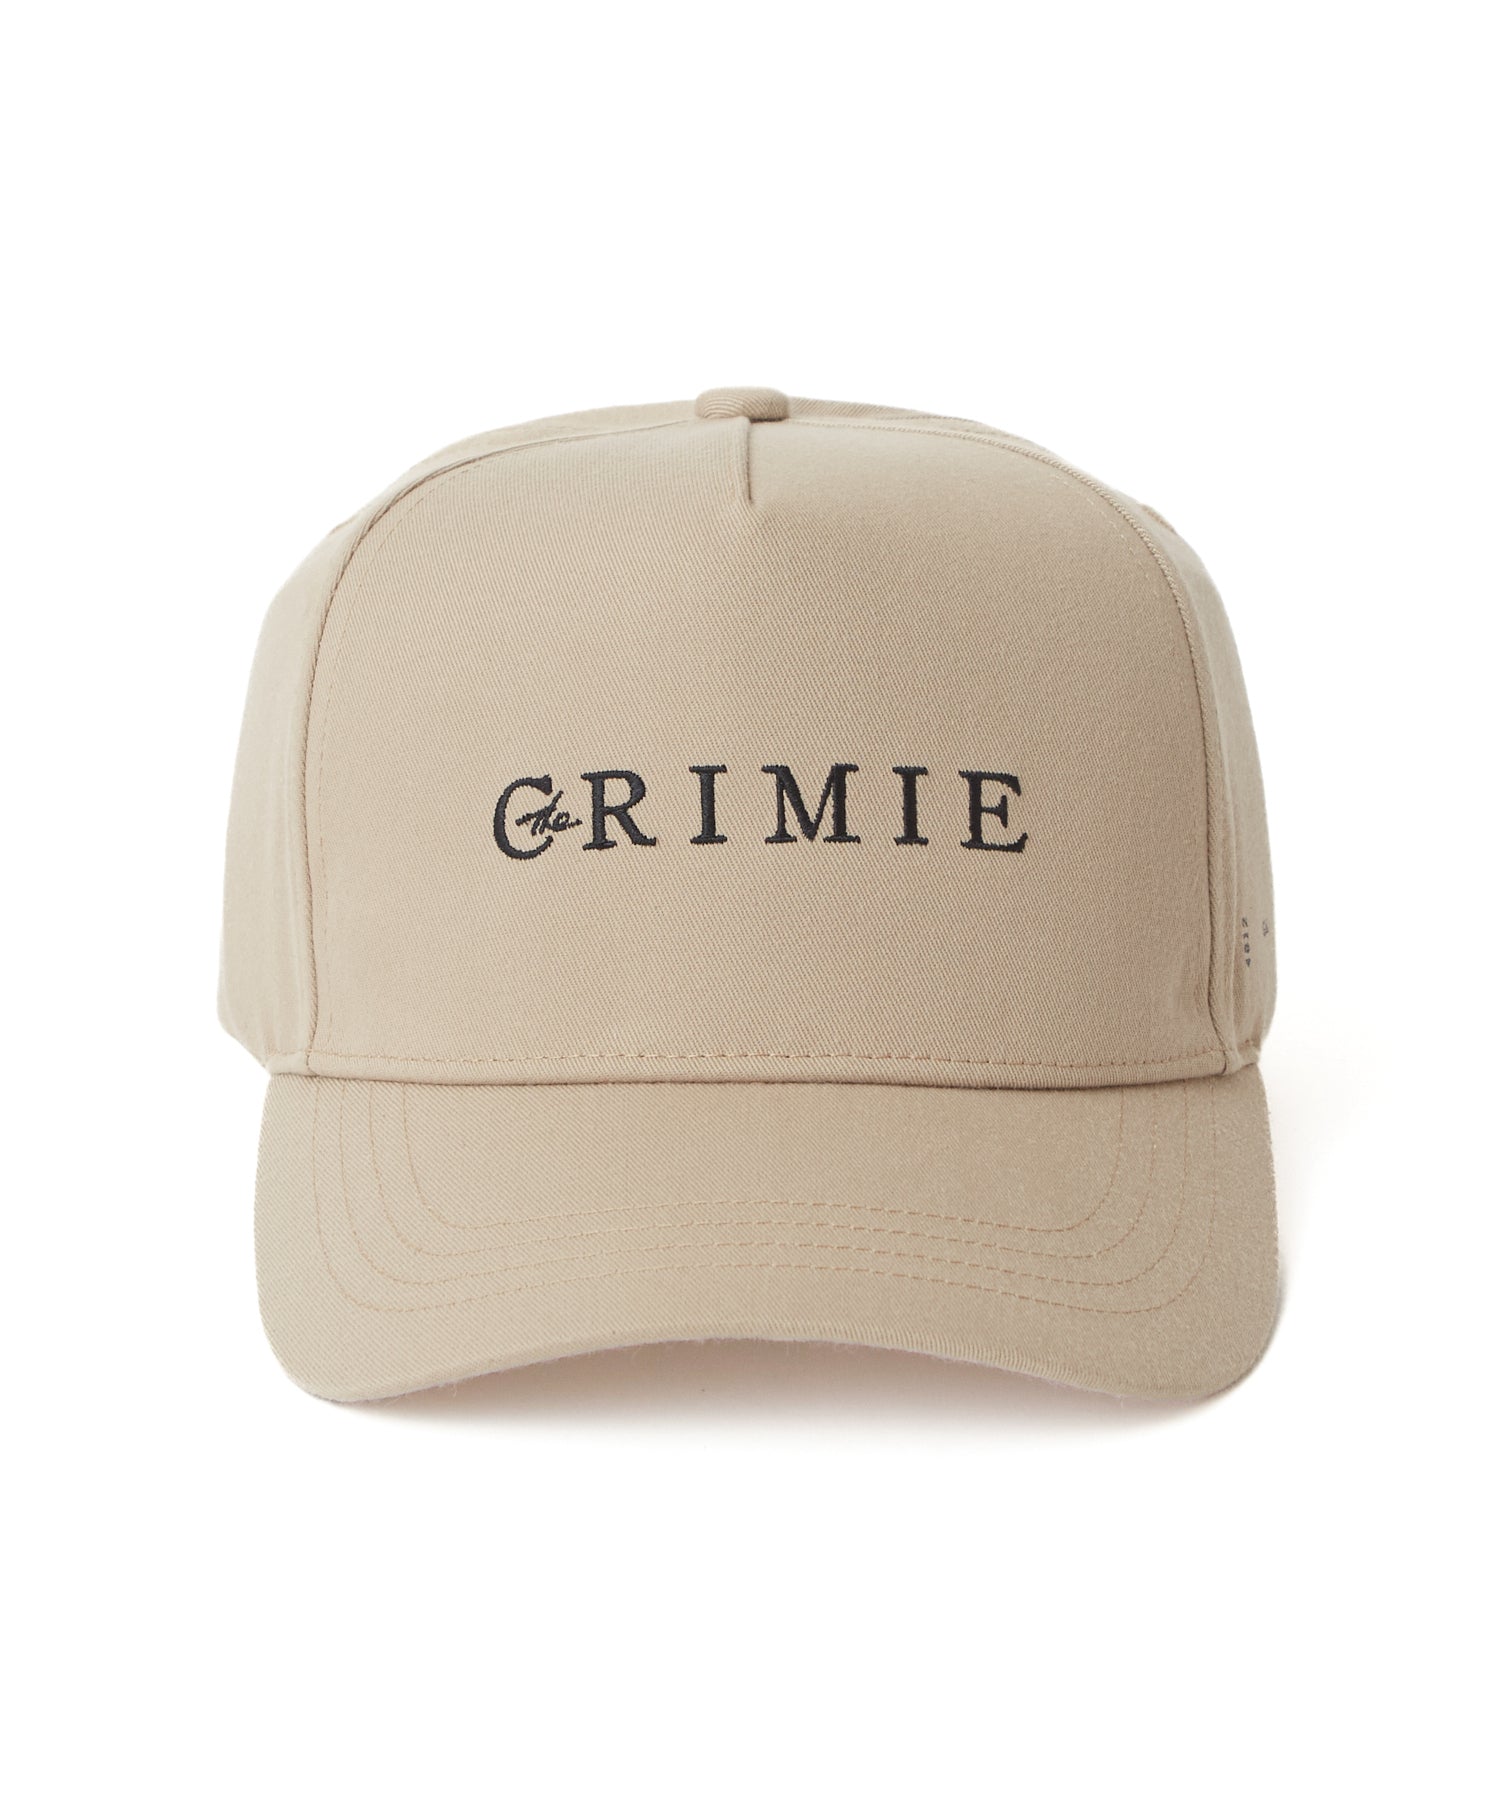 THE CRIMIE EMBROIDERY CAP